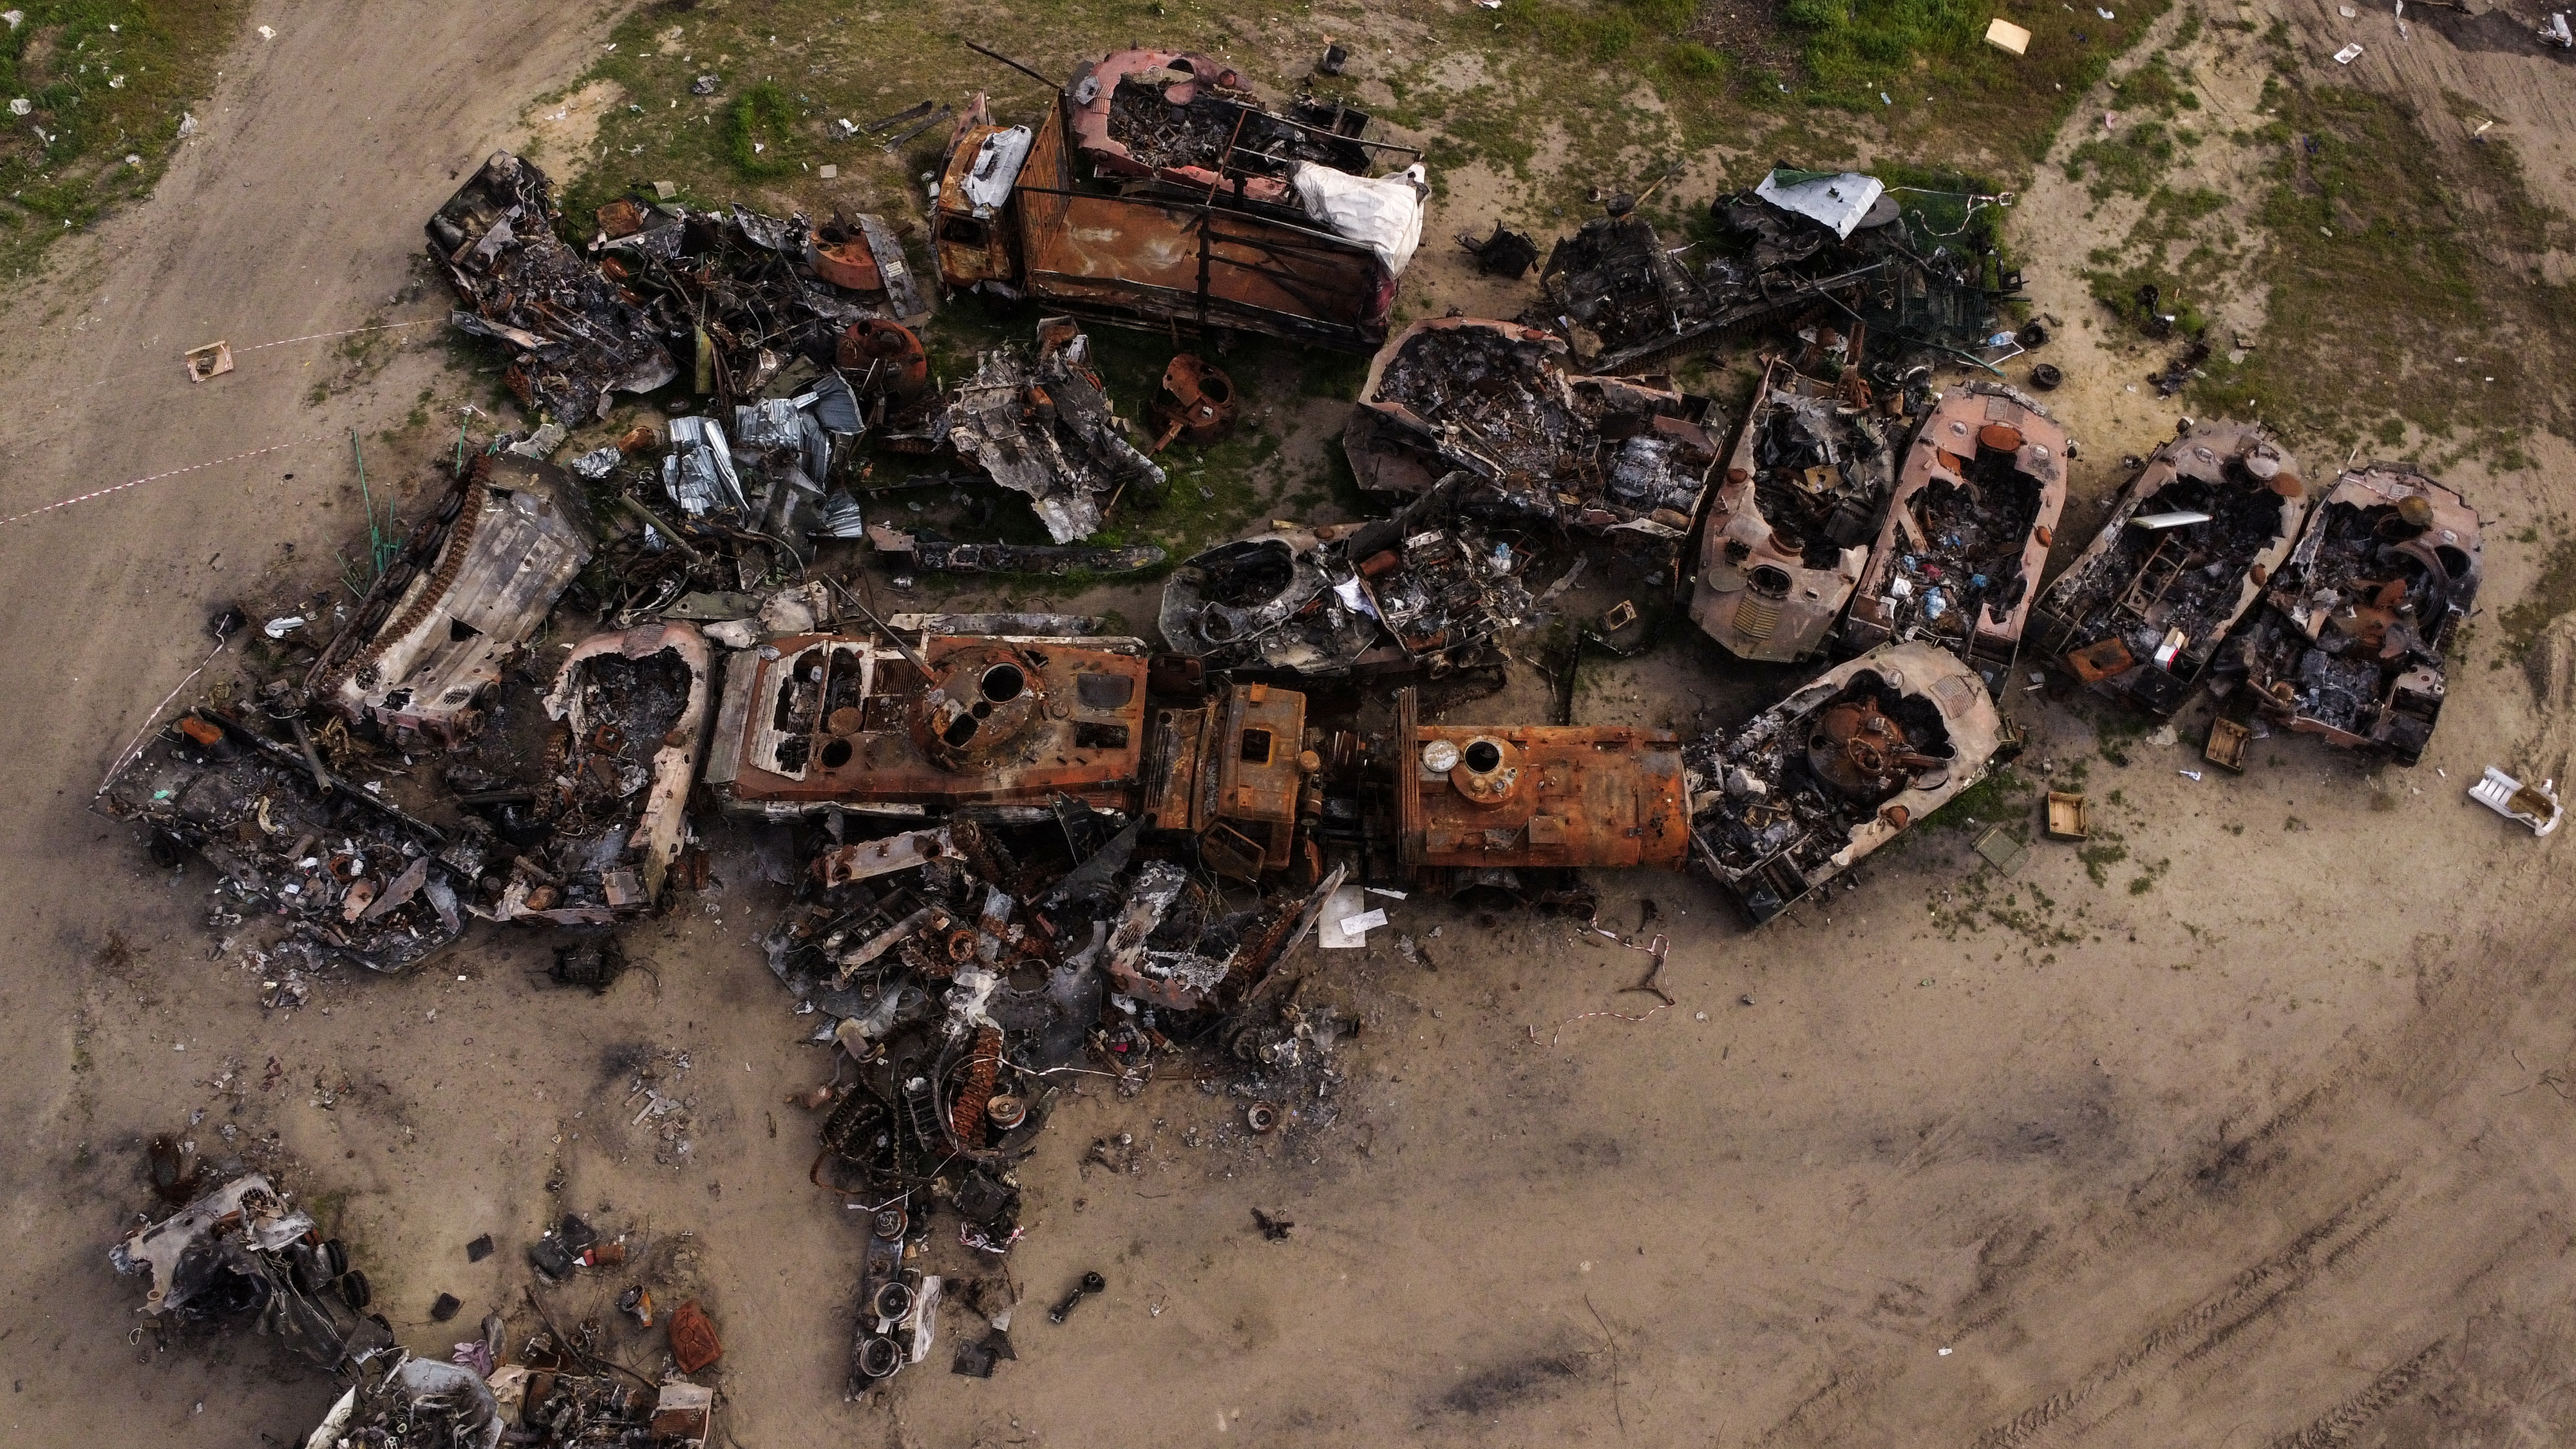 Russian military tanks and vehicles destroyed in Bucha, Ukraine.  Image taken by drone on May 16, 2022 (REUTERS/Jorge Silva)